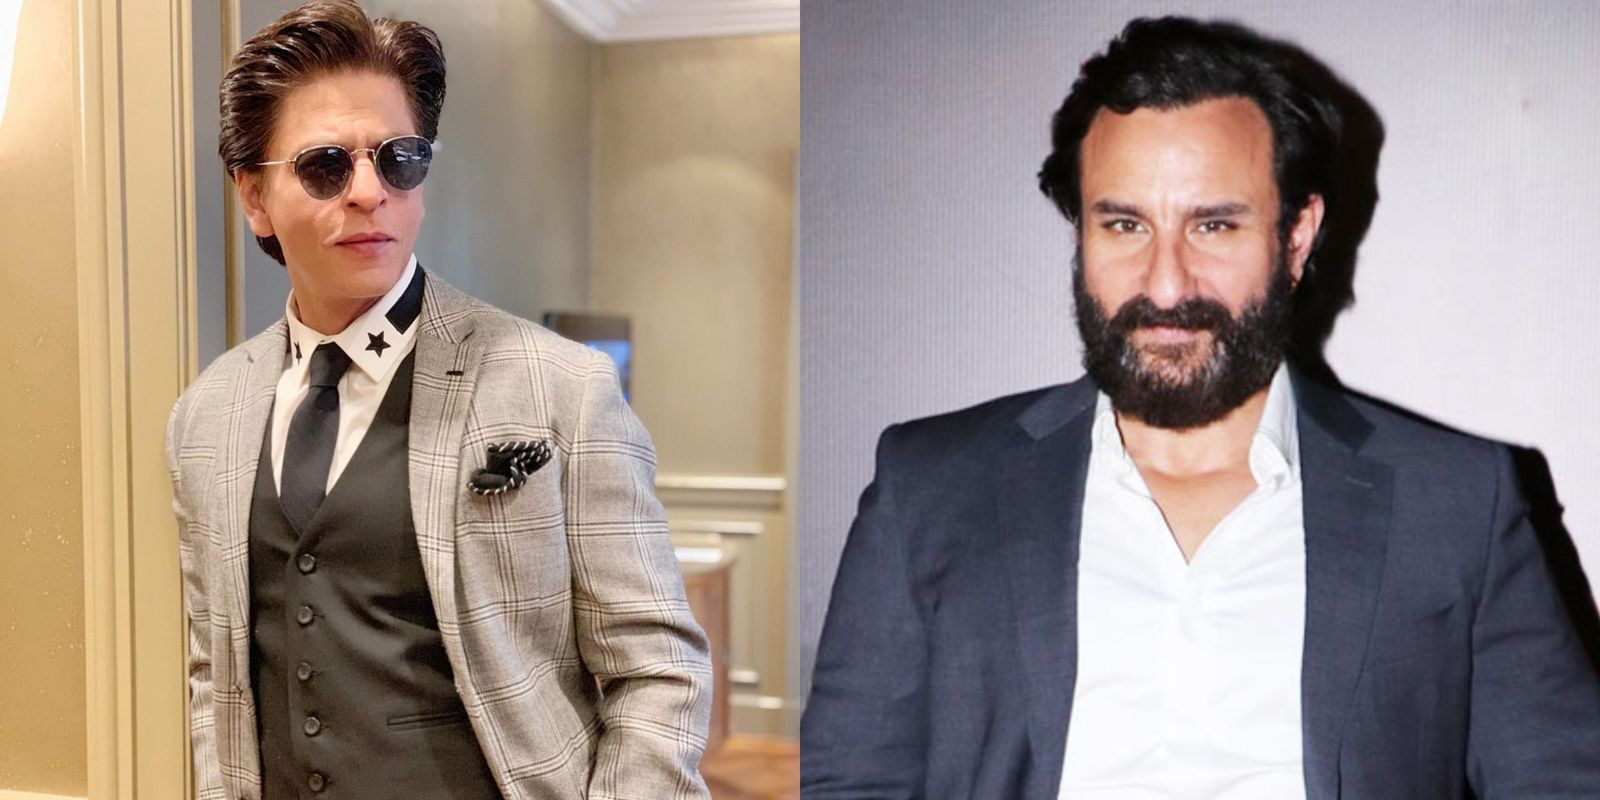 Saif Ali Khan On SRK's Recent Slump: There’s A Certain Resilience To A 90’s Actor, Just A Question Of Finding That Right Project